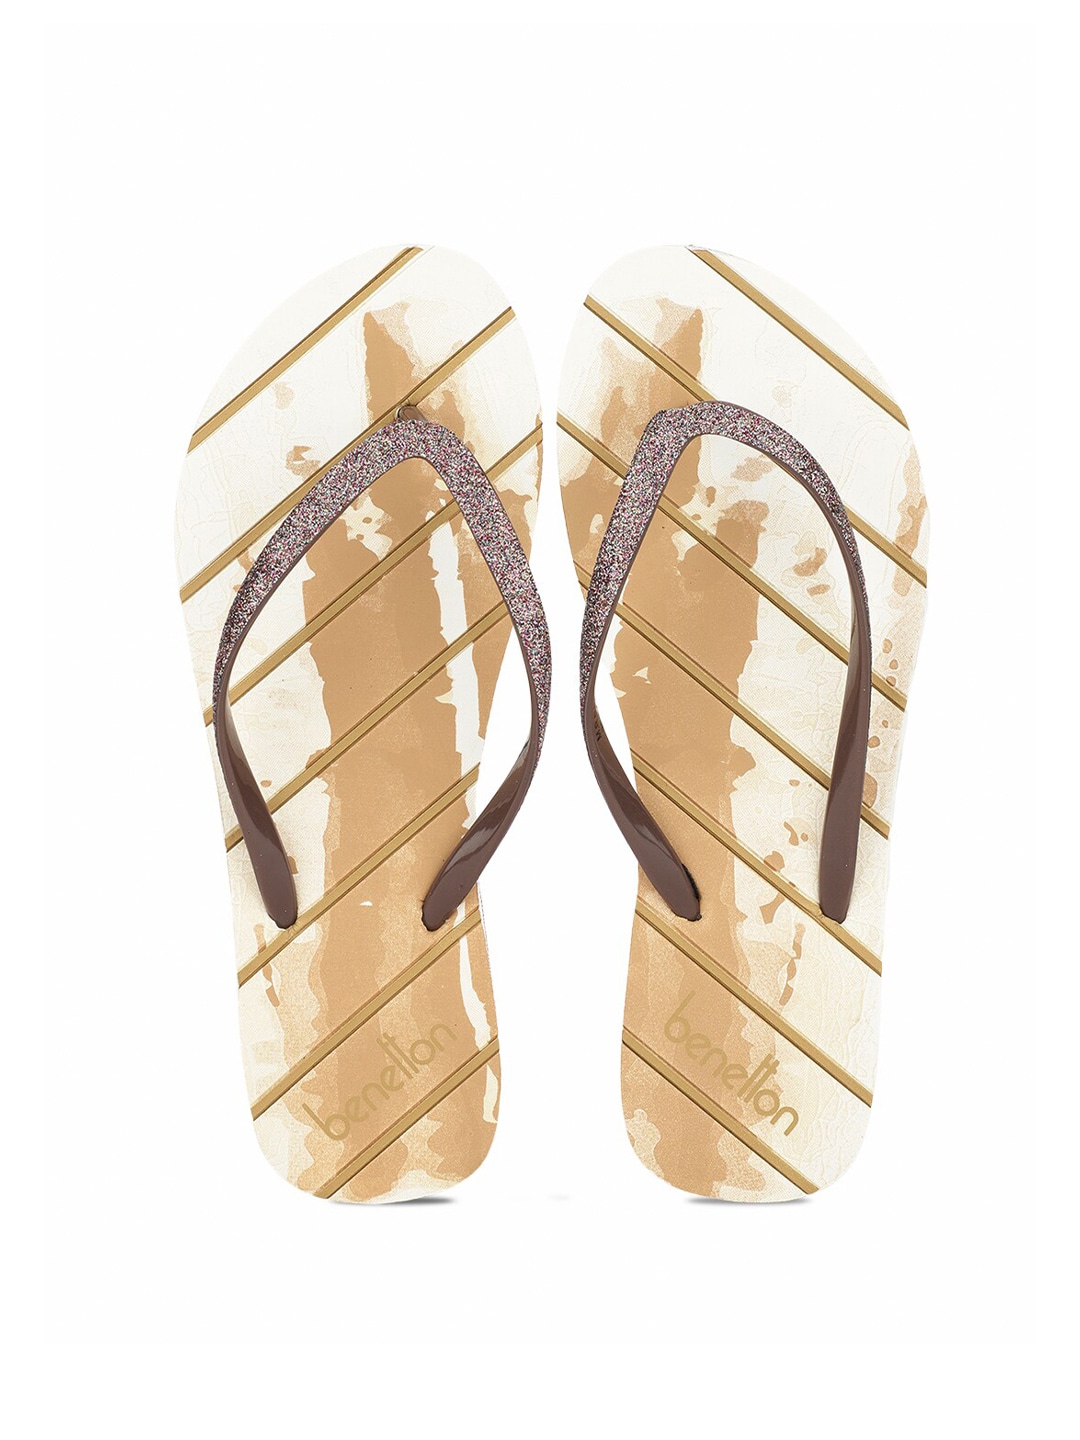 United Colors of Benetton Women Brown & White Printed Rubber Thong Flip-Flops Price in India